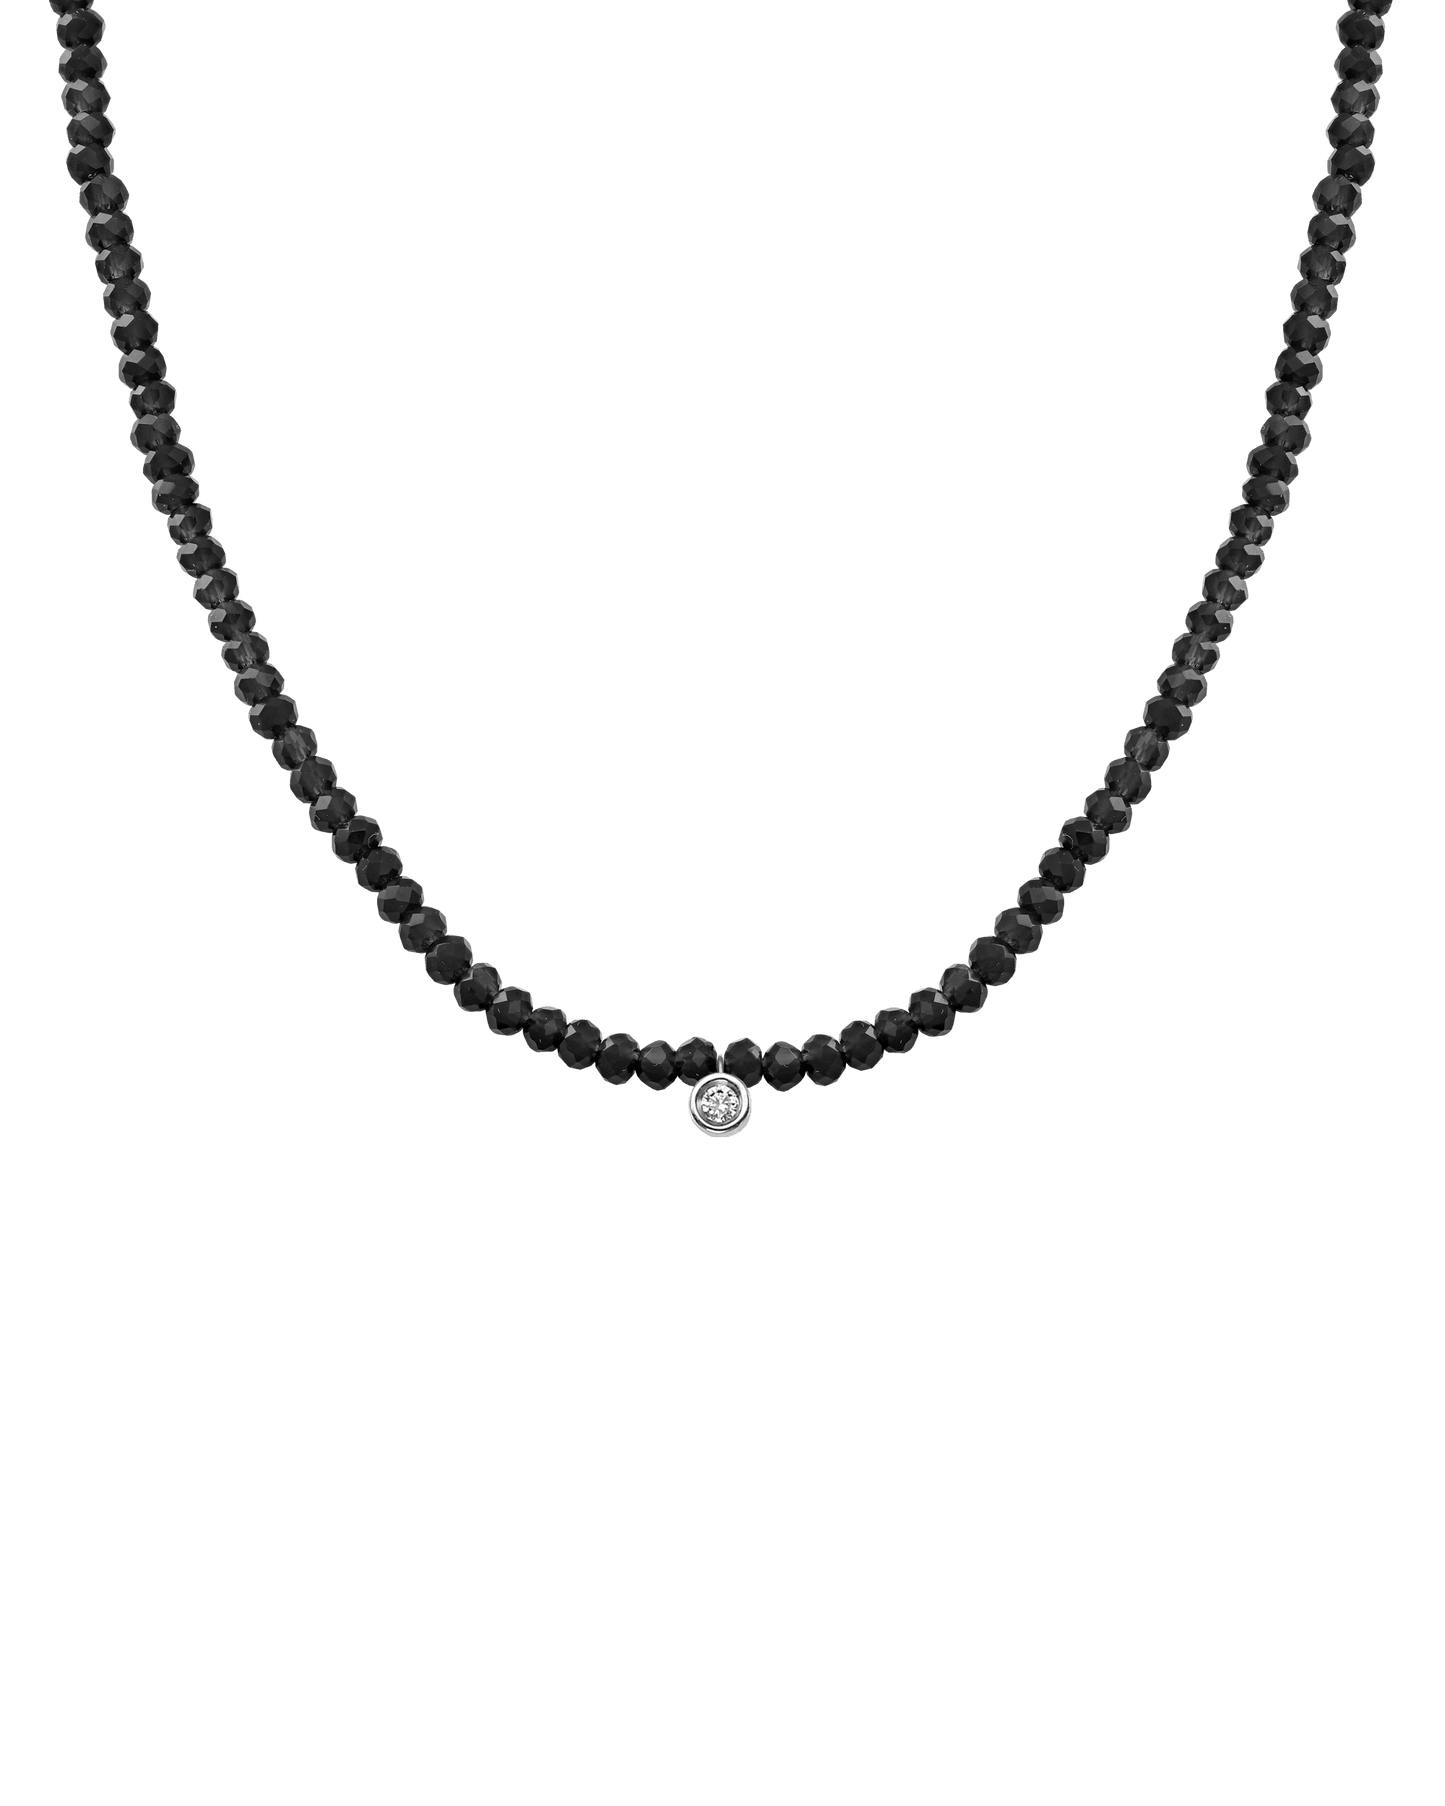 Apatite Gemstone & Diamond Necklace - 14K White Gold Necklaces 14K Solid Gold Glass Beads Black Spinnel Small: 0.03ct 14"